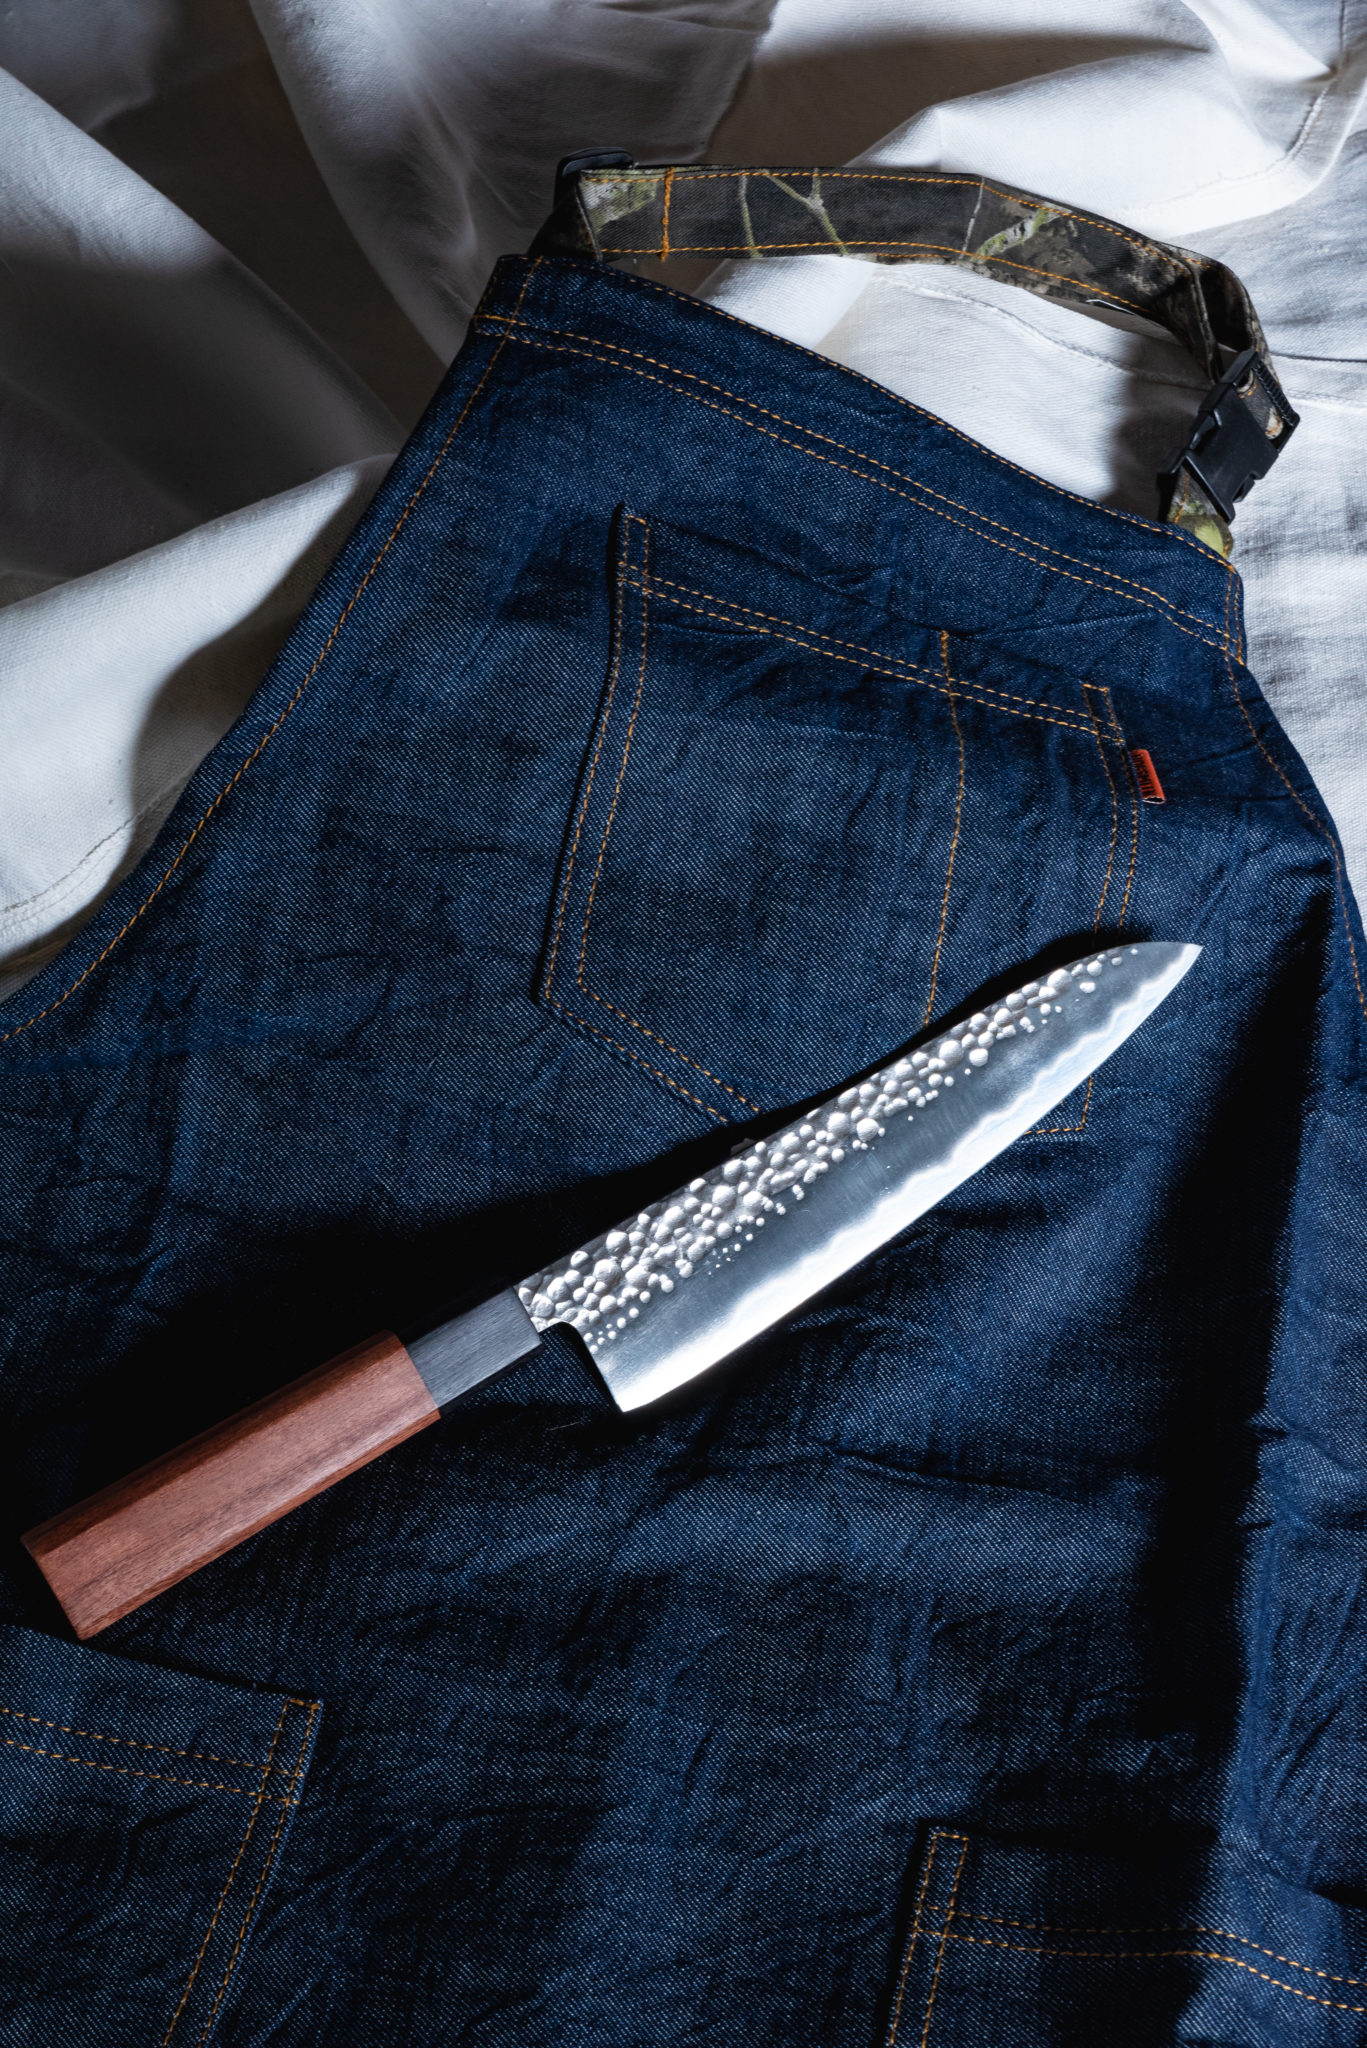 There's a good reason why Japanese knives, like the Shokunin, are coveted and respected in a different way compared with other knives